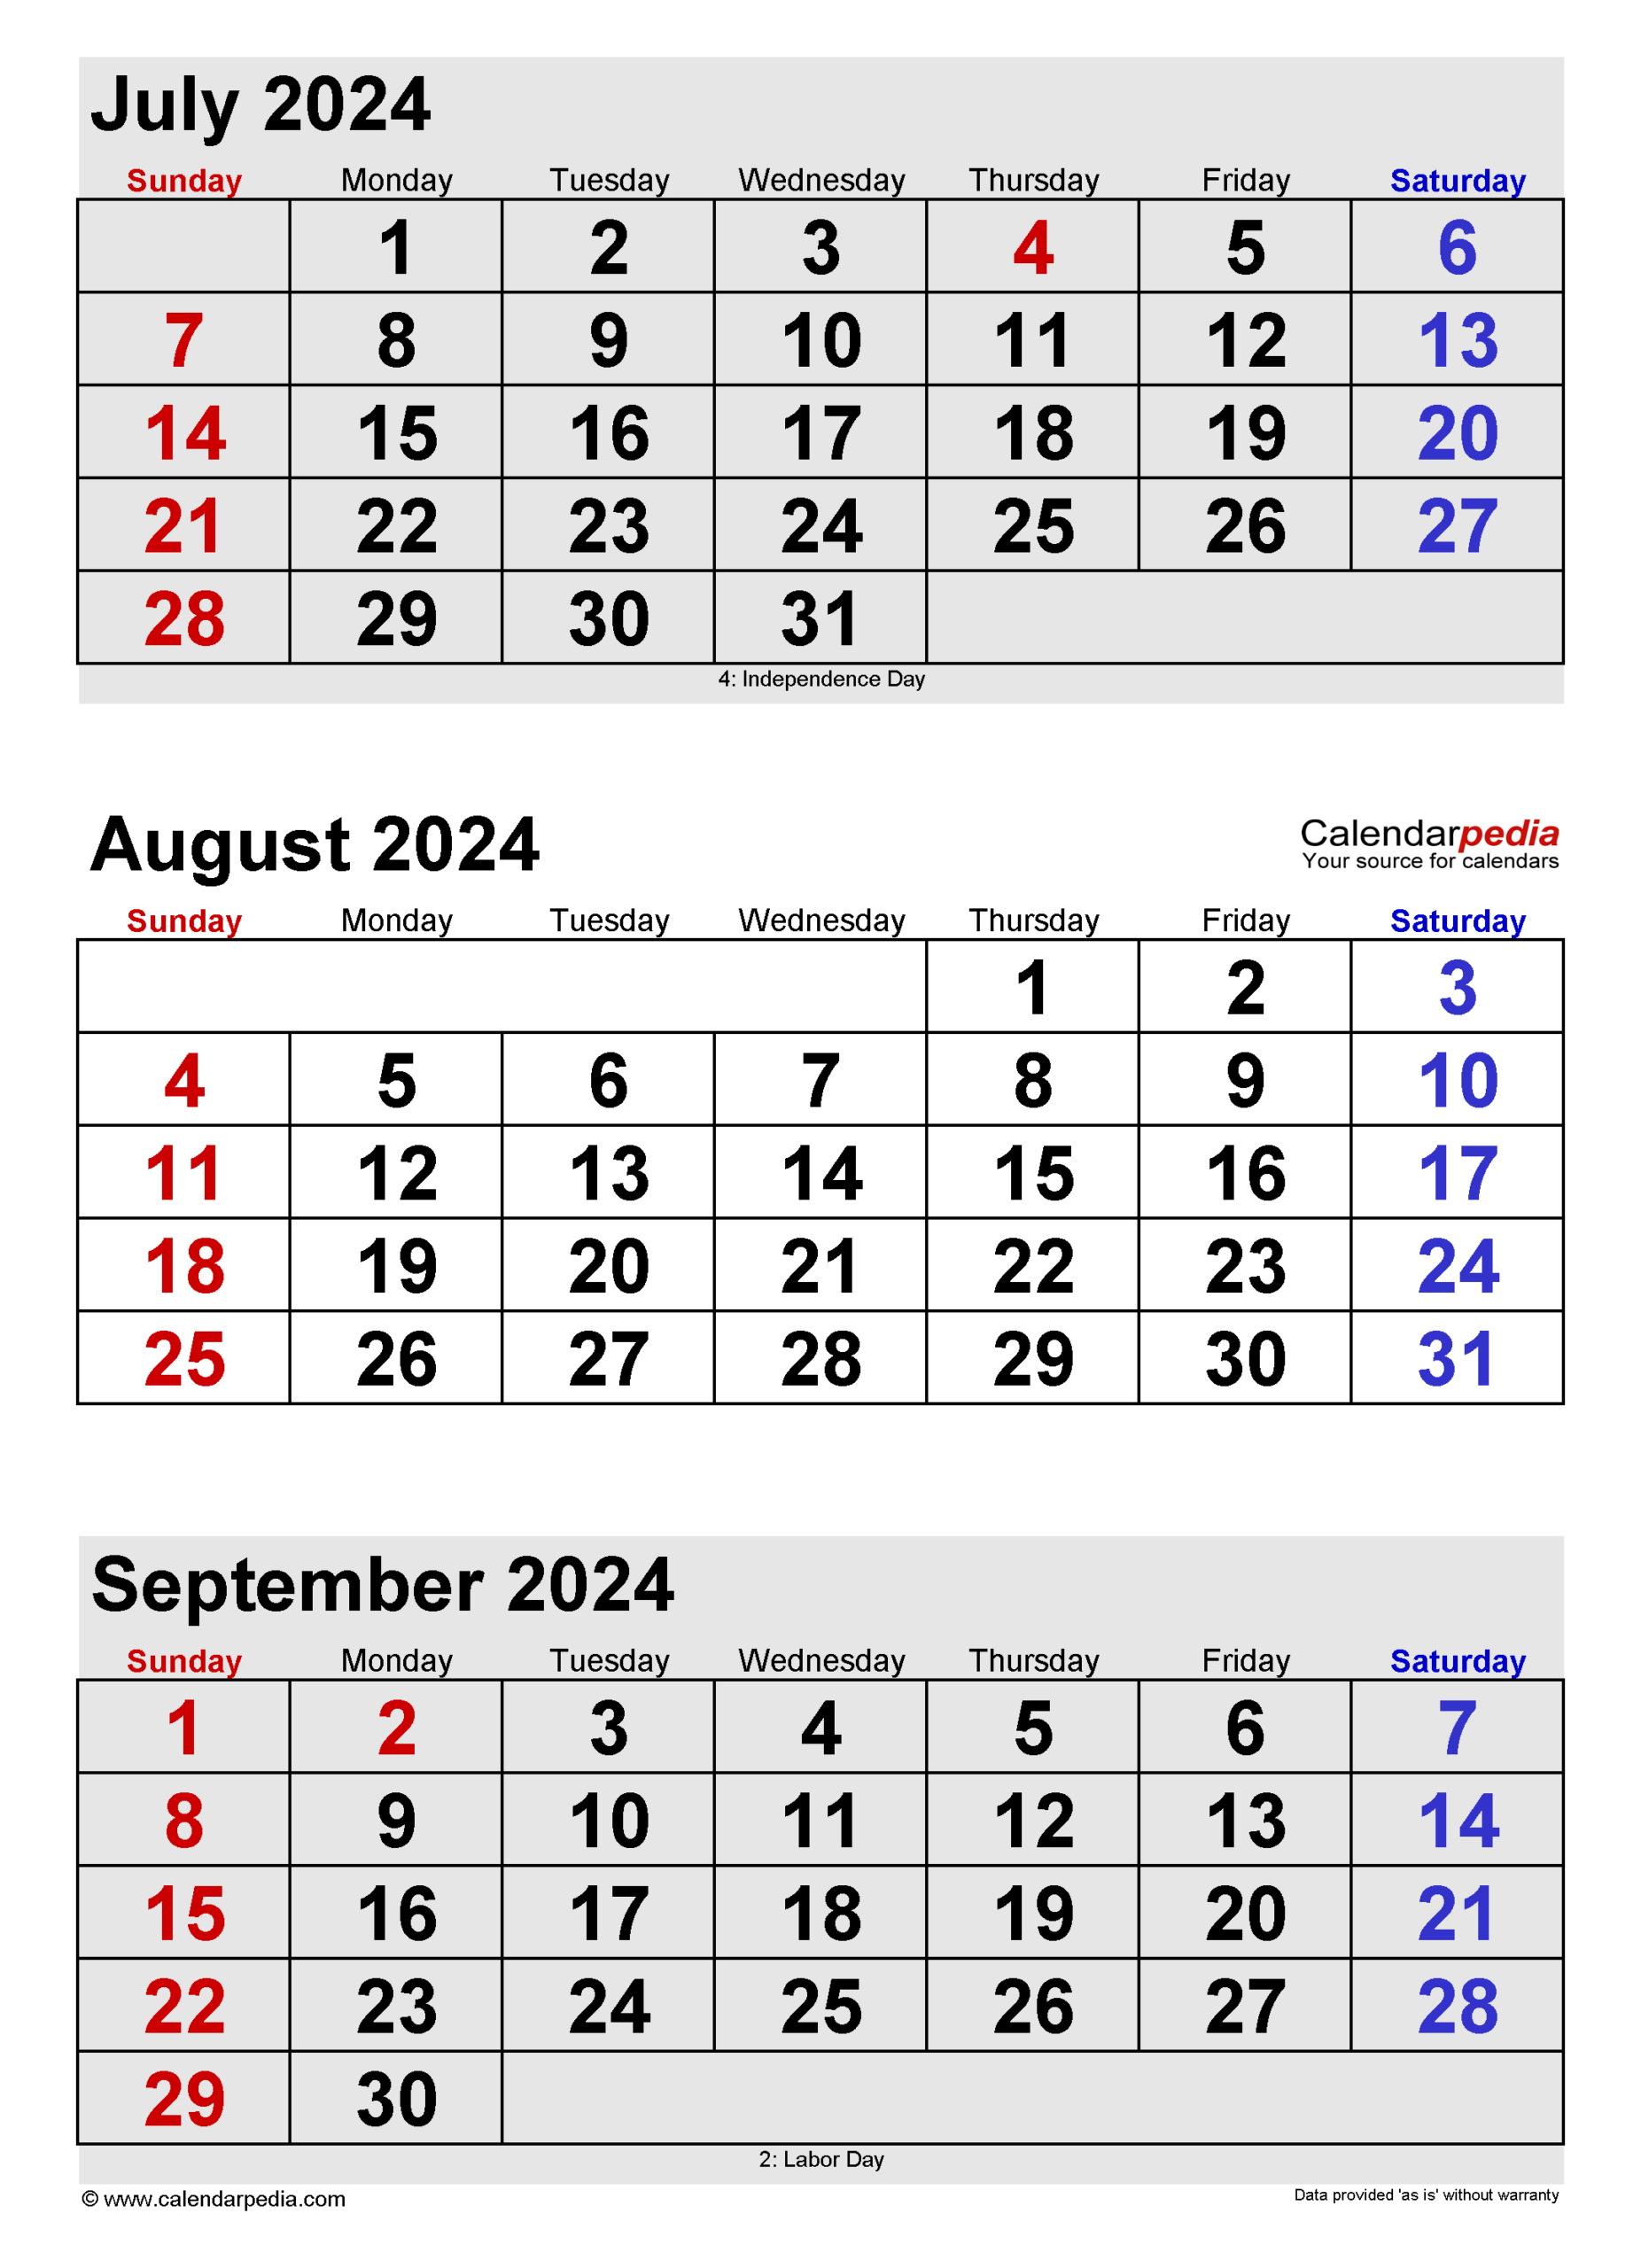 August 2024 Calendar | Templates For Word, Excel And Pdf | Calendar 2024 July August September